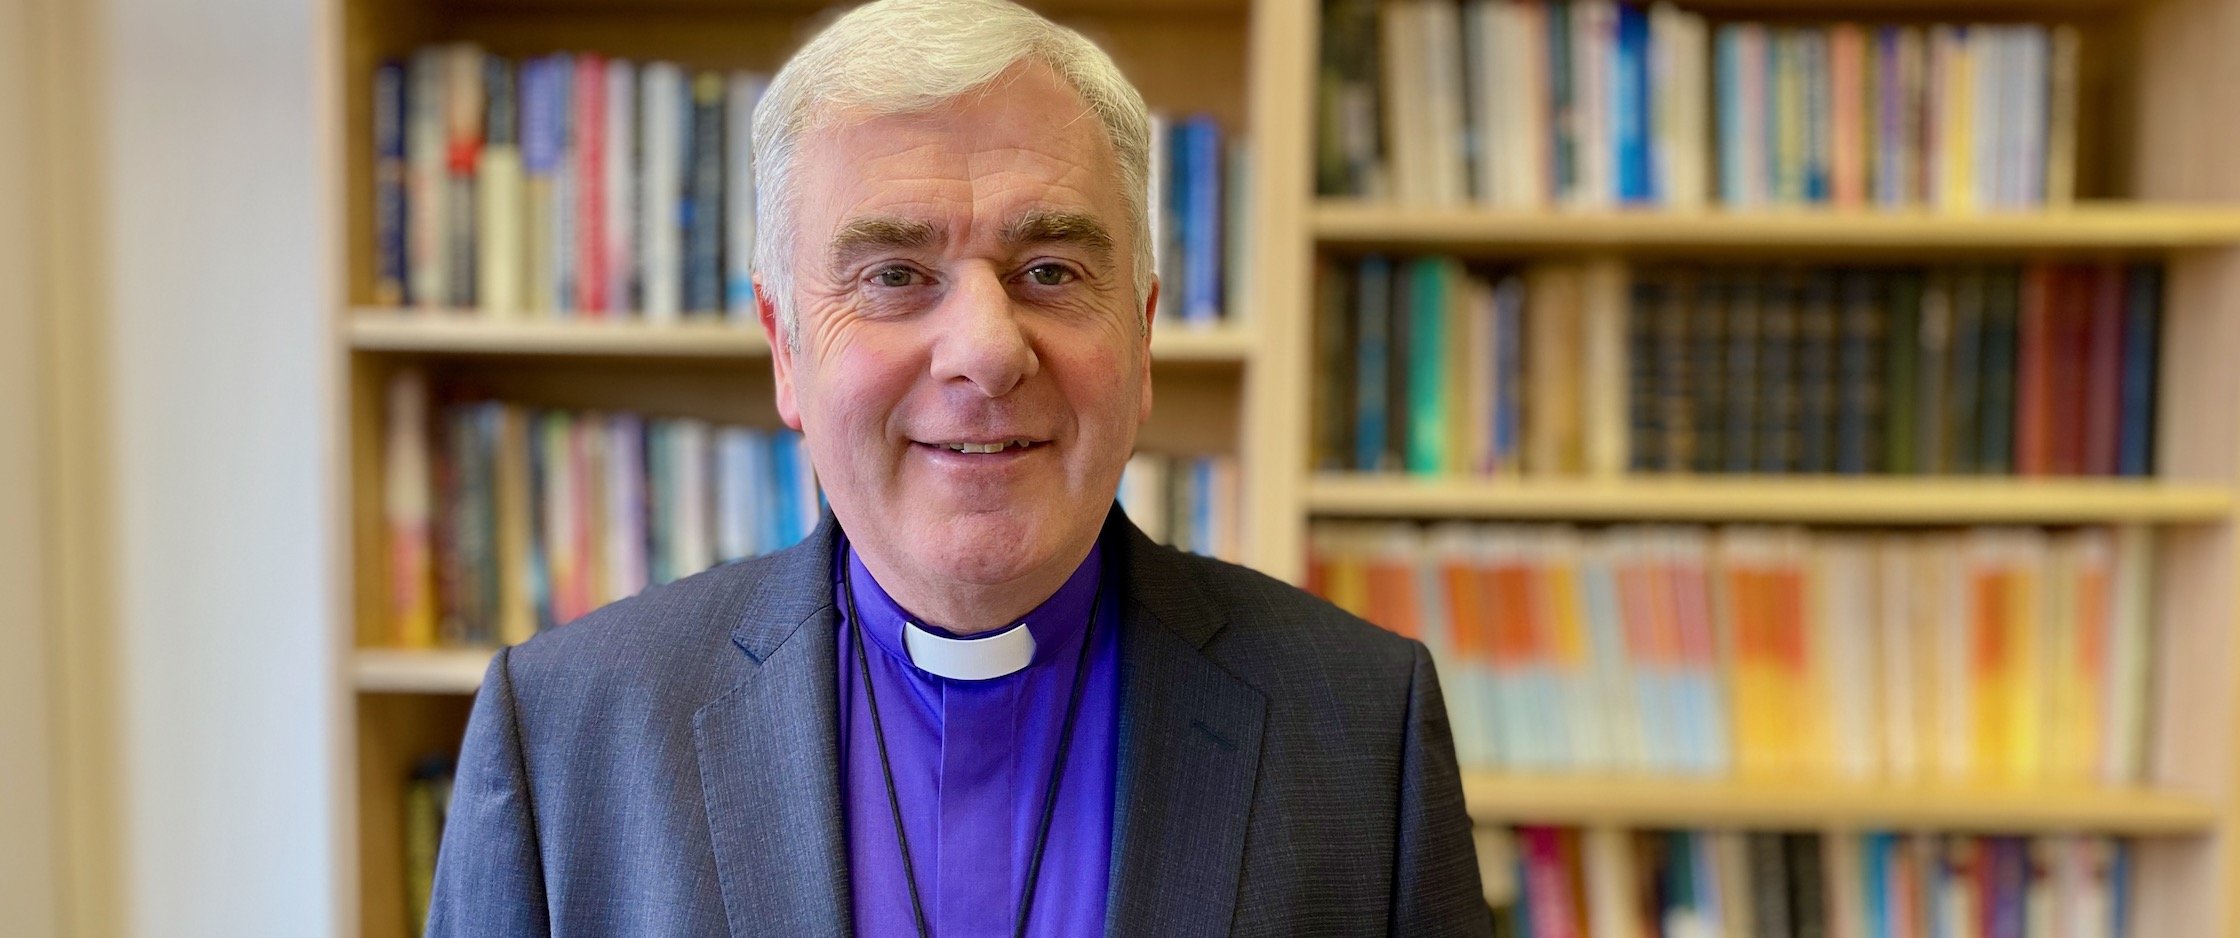 The Rt Revd David McClay, Bishop of Down and Dromore.